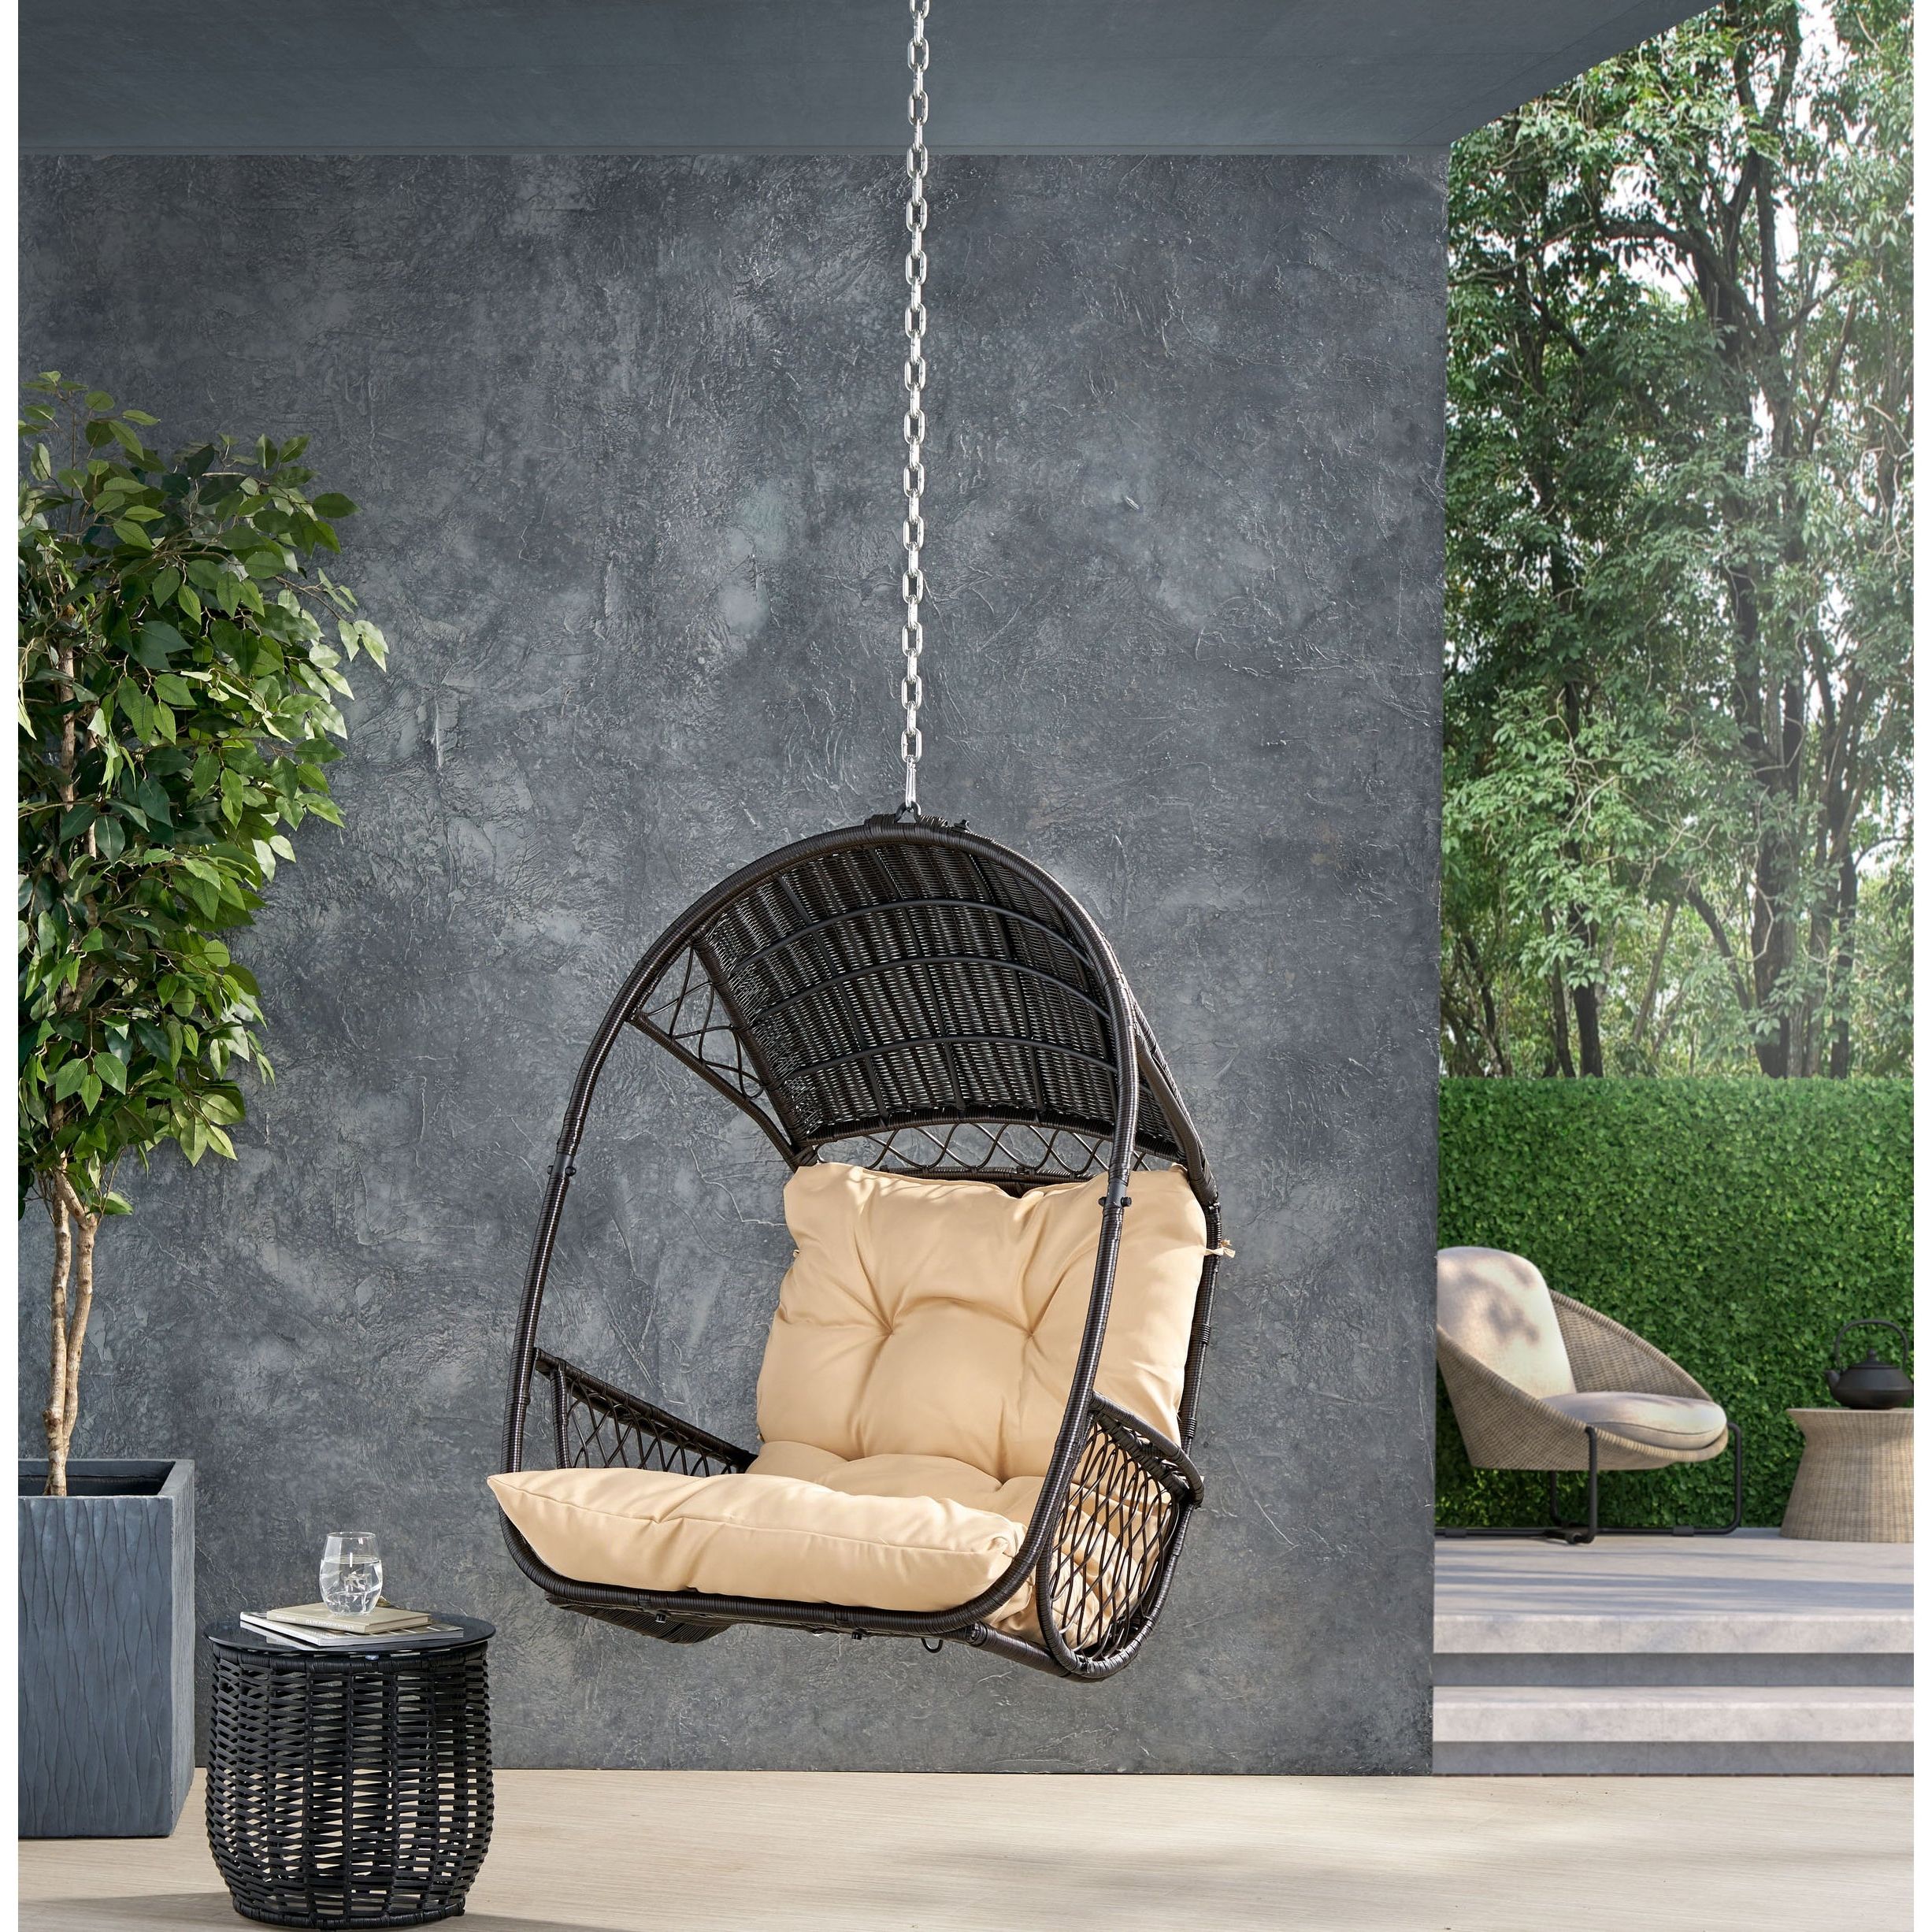 Most Recently Released Greystone Outdoor/indoor Wicker Hanging Chair W/8 Foot Chainchristopher  Knight Home – On Sale – Overstock – 31825459 Within Greystone Plant Stands (View 8 of 10)